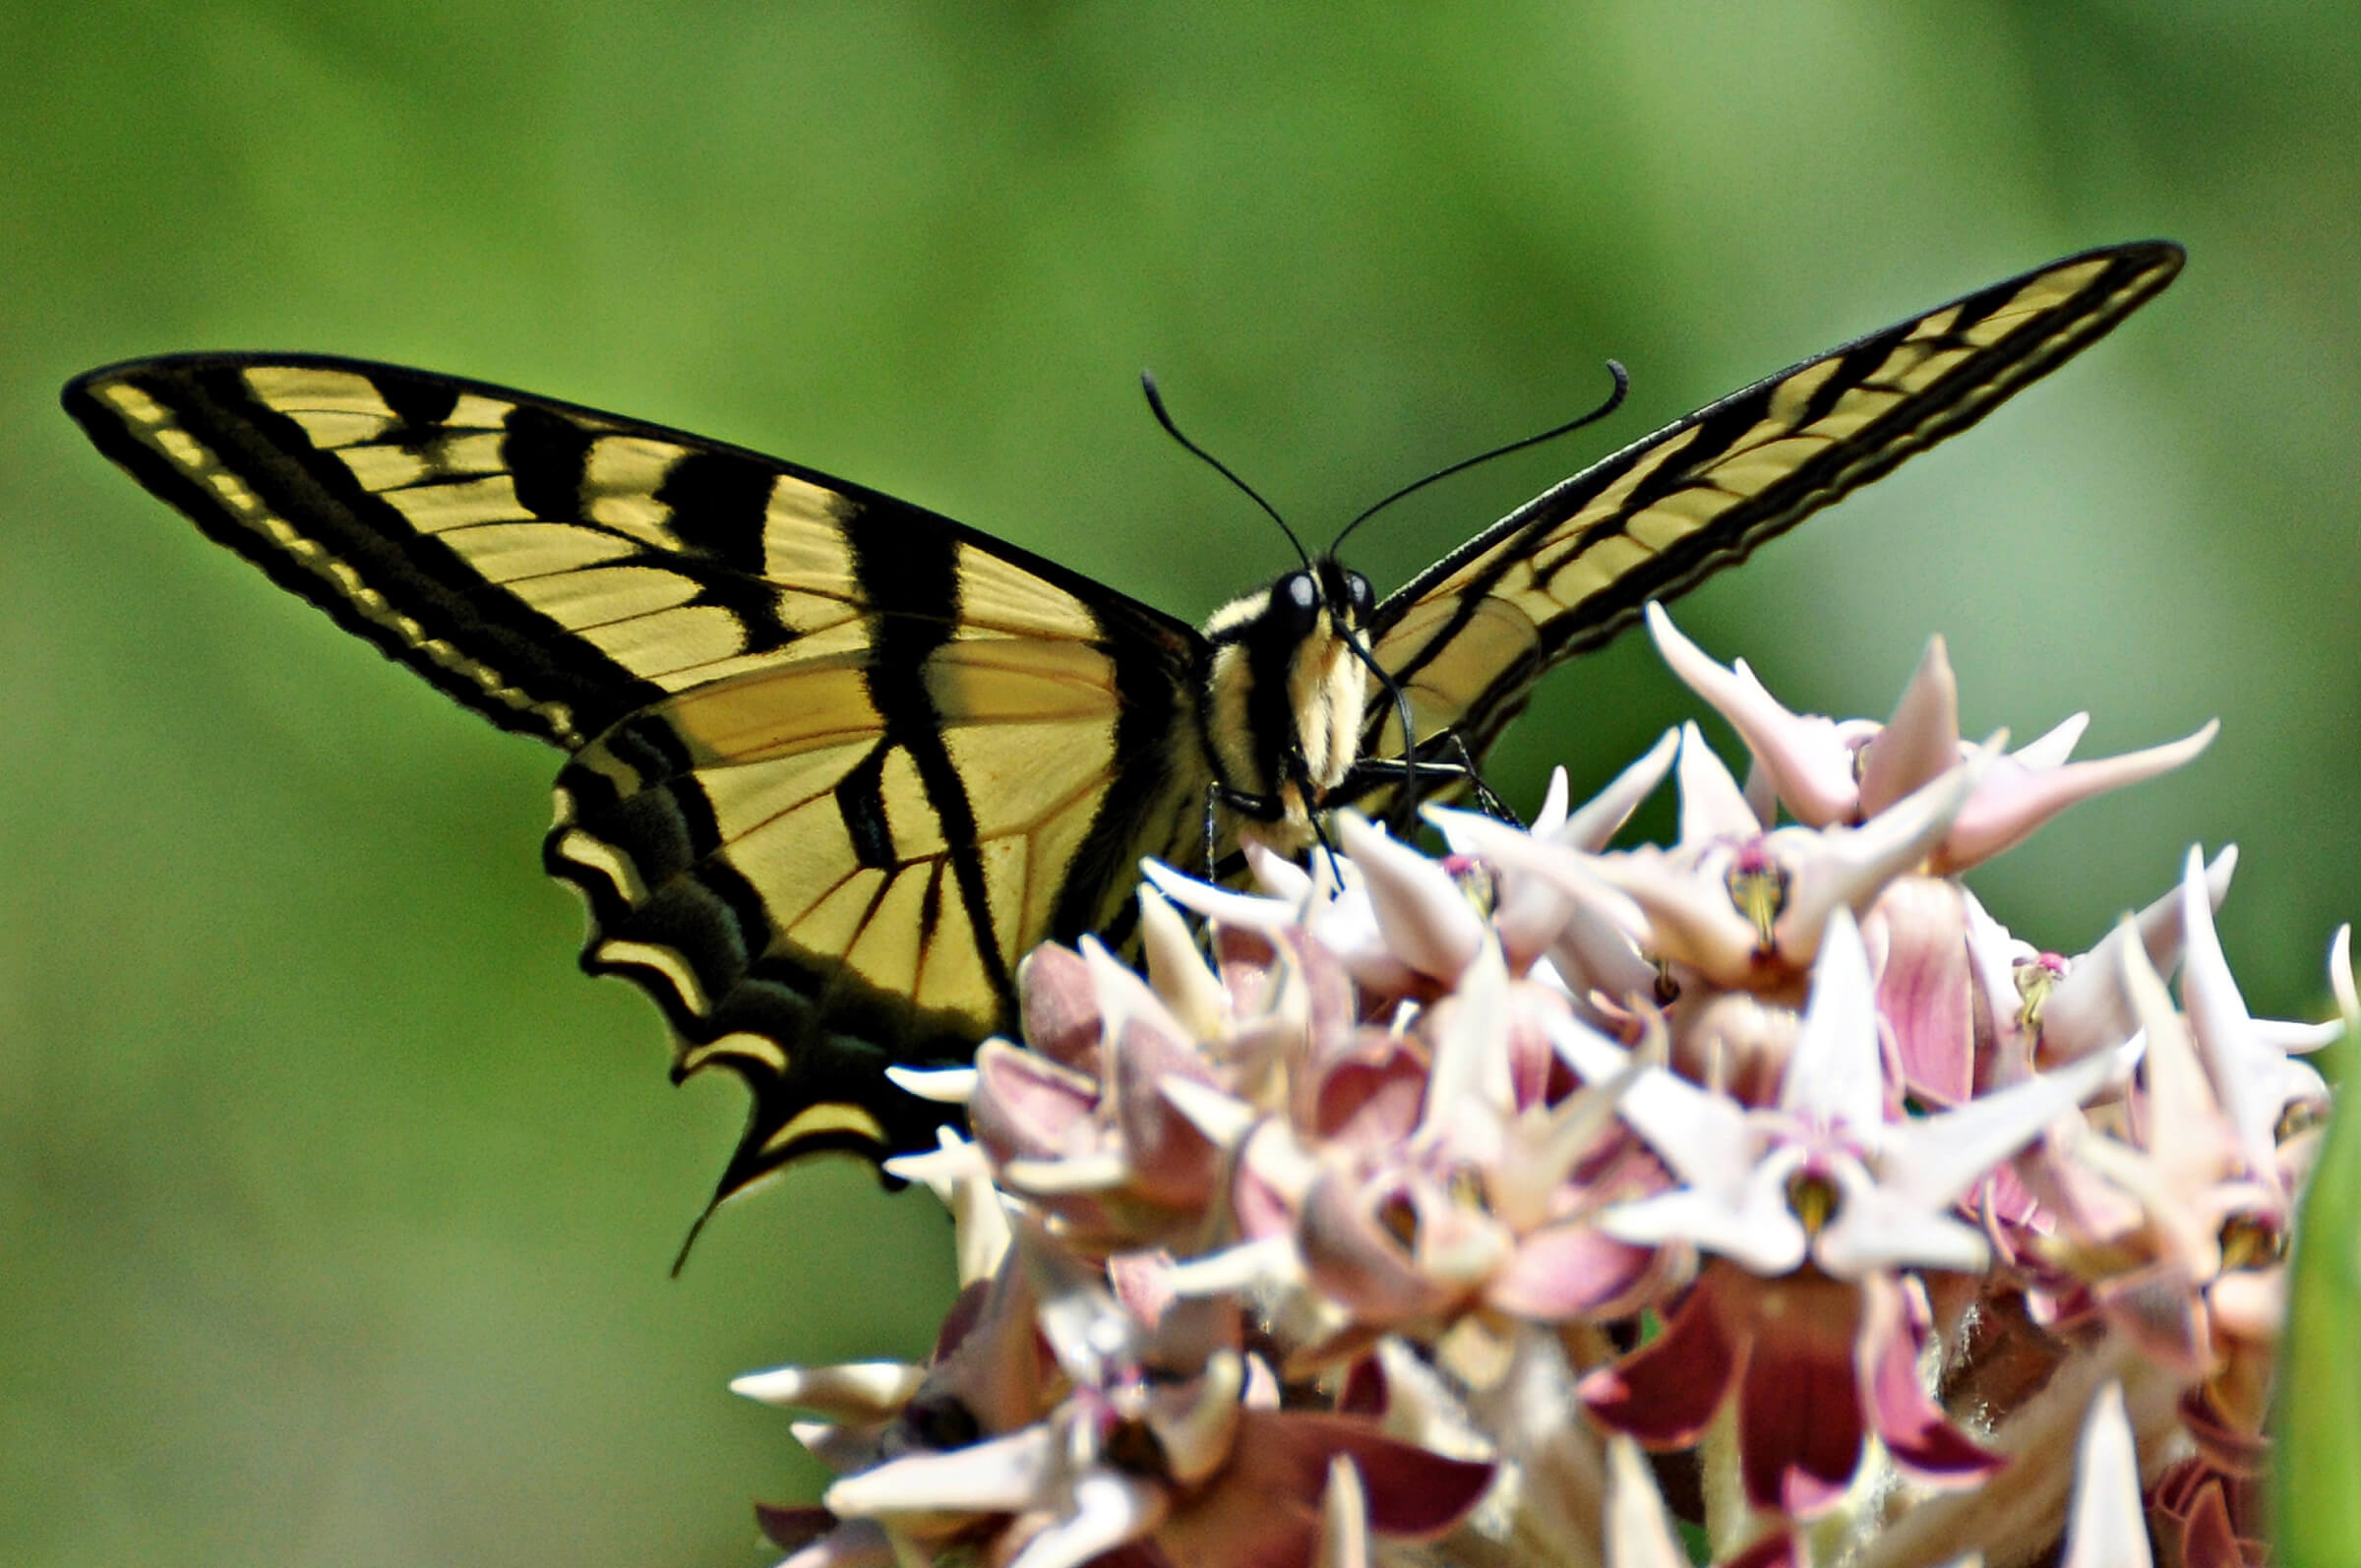 A Western Tiger Swallowtail sipping nectar from the flowers of Showy Milkweed.